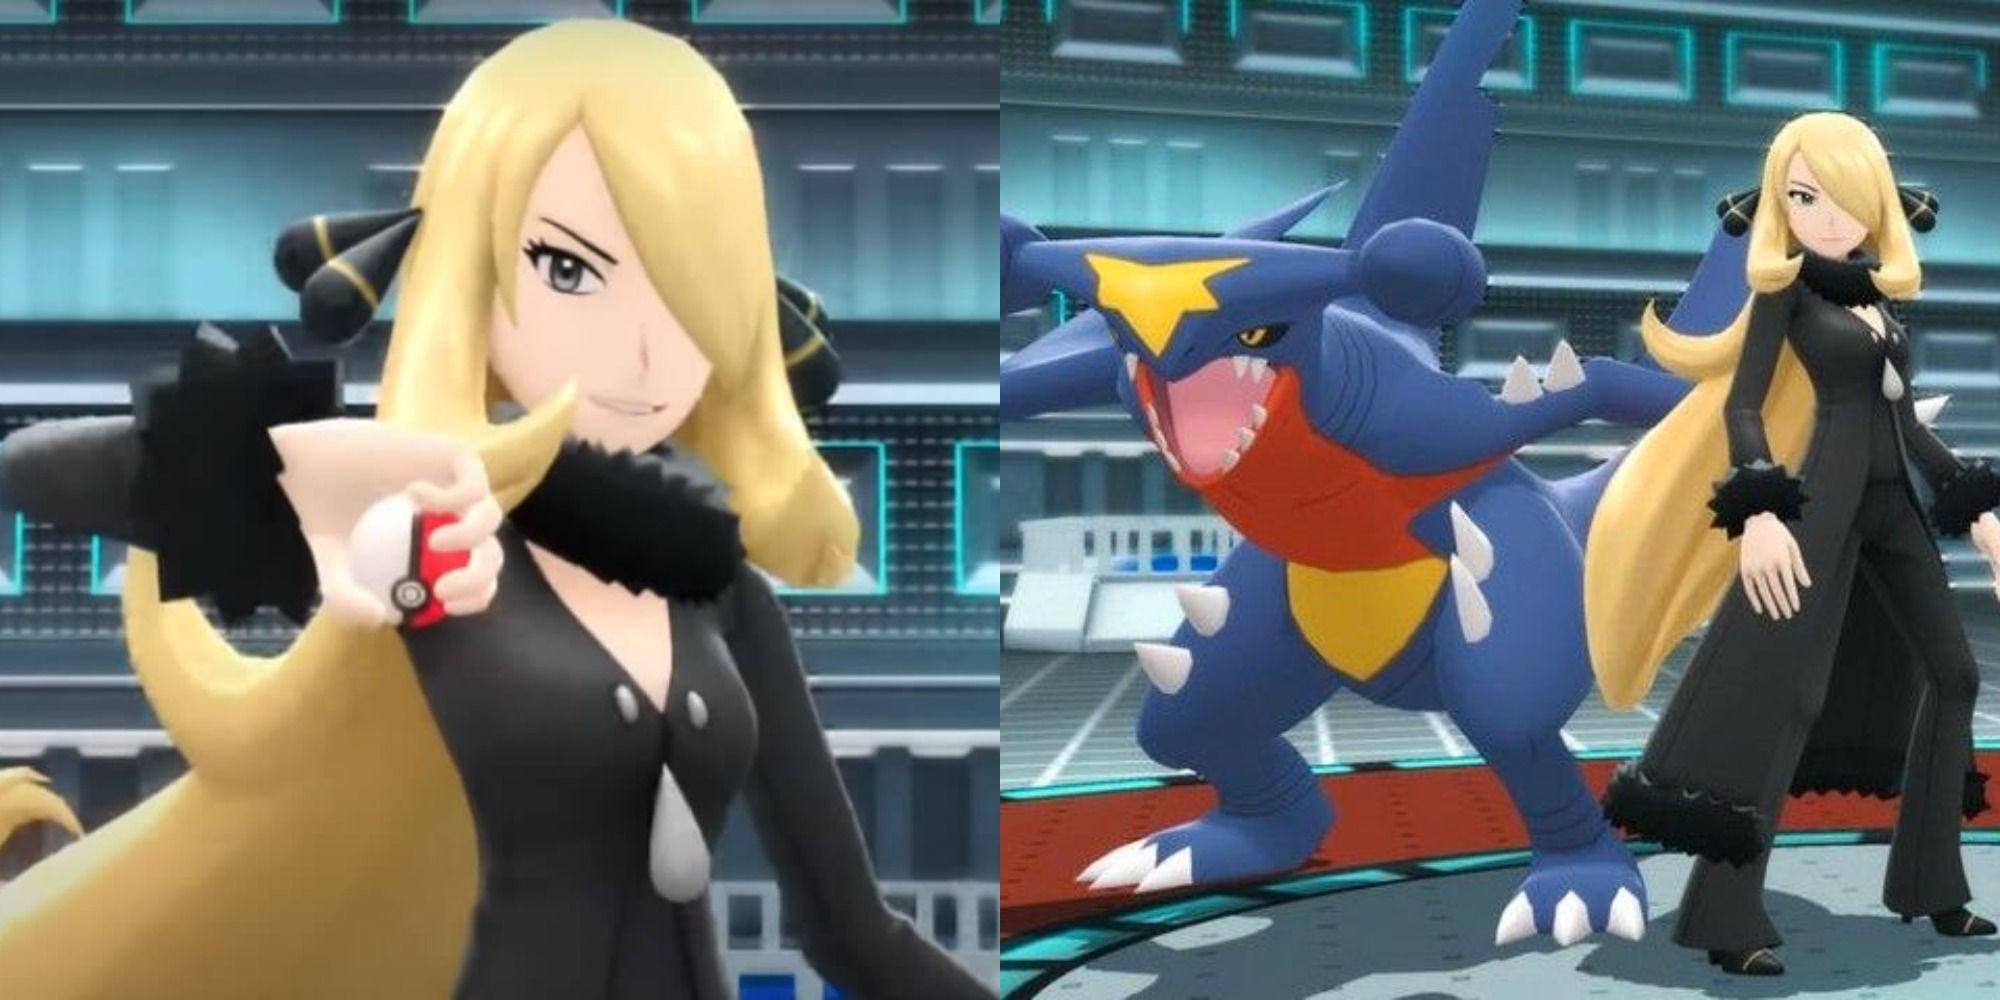 Split image showing Cynthia holding a Pokeball and Cynthia with Garchomp in Pokémon BDSP